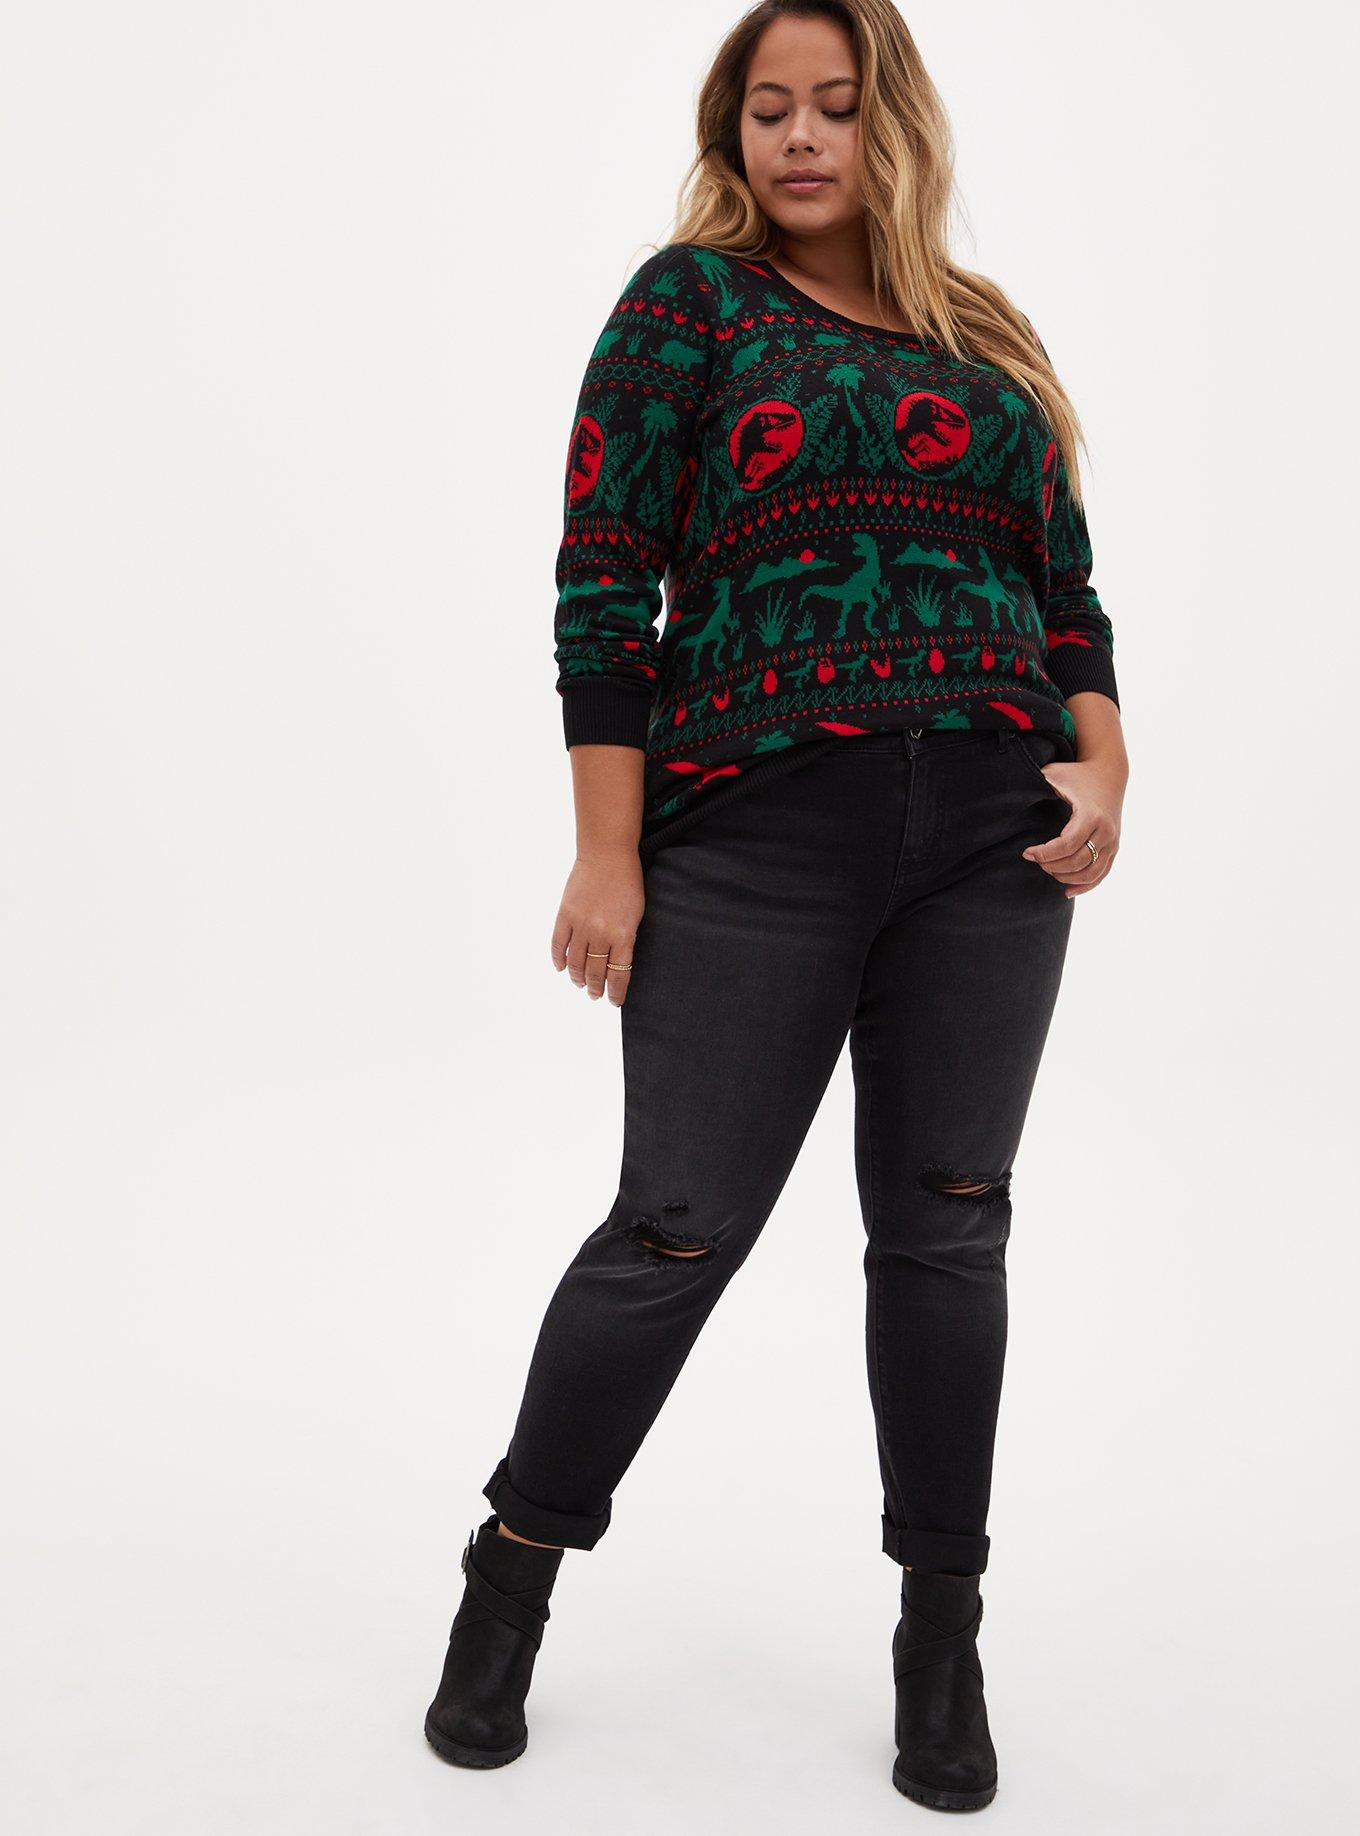 Womens Christmas Sweater,Plus Size Sweaters,Fall,coats for women